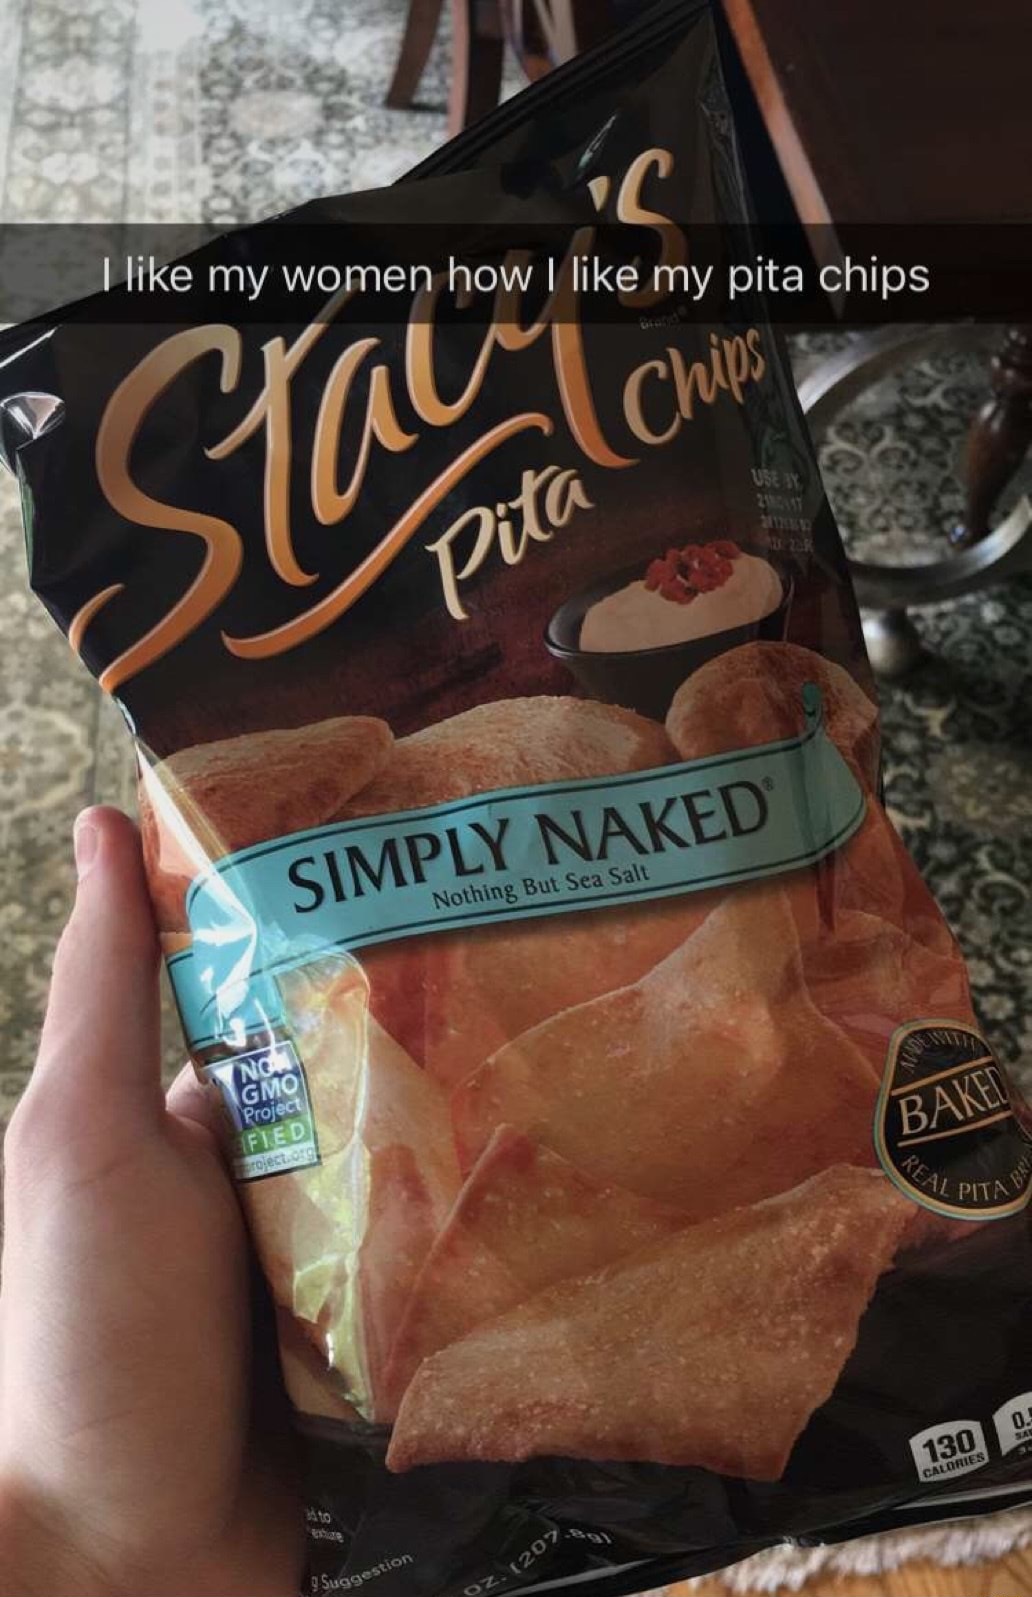 Snapchat about wanting your pita chips just like your women.